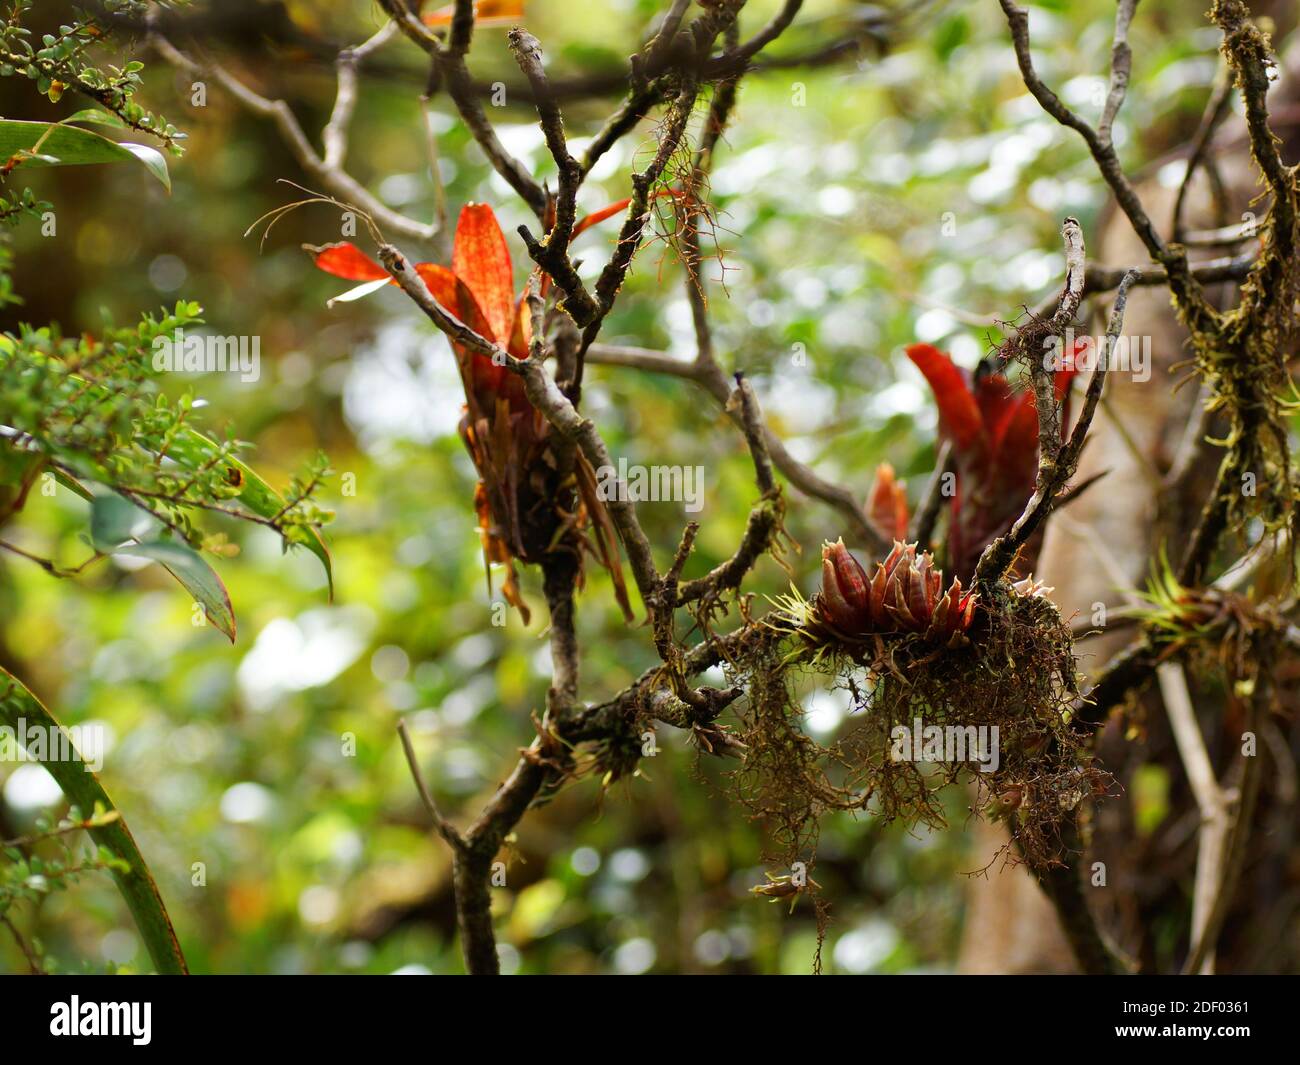 Bromeliads and moss  growing on a tree branchs, Rainforest, Costa Rica, Central America Stock Photo